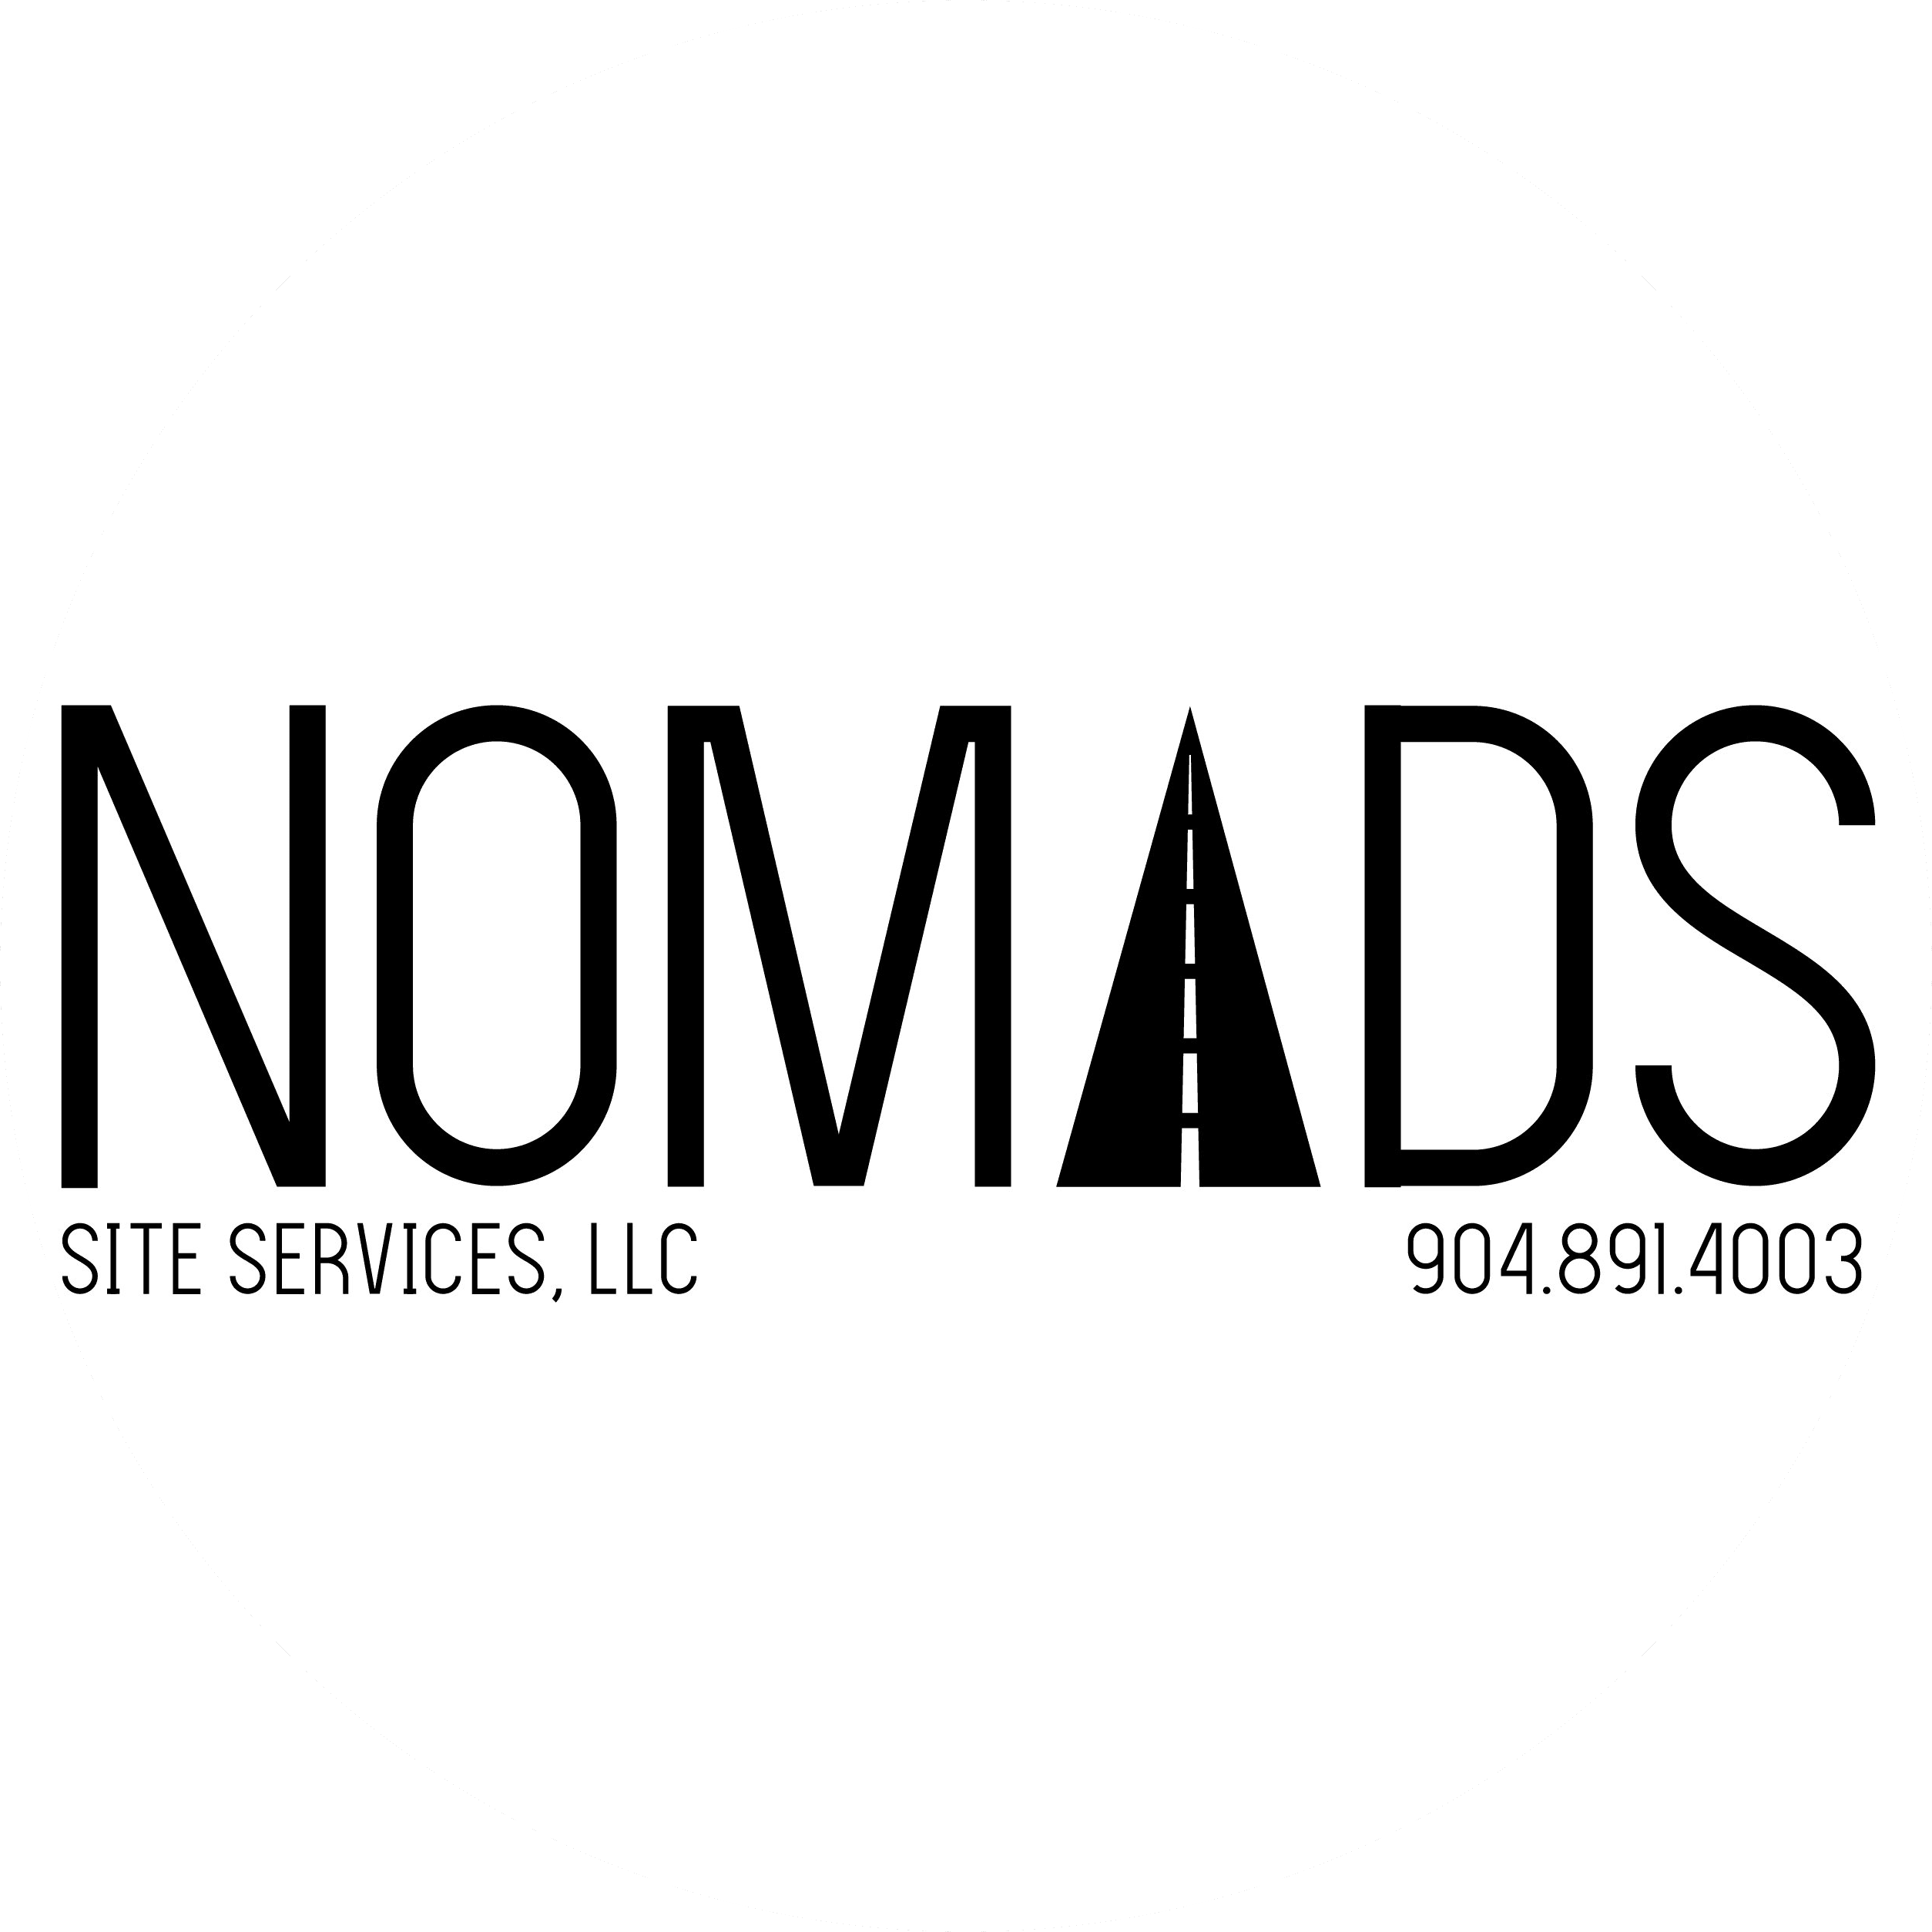 Nomads Site Services